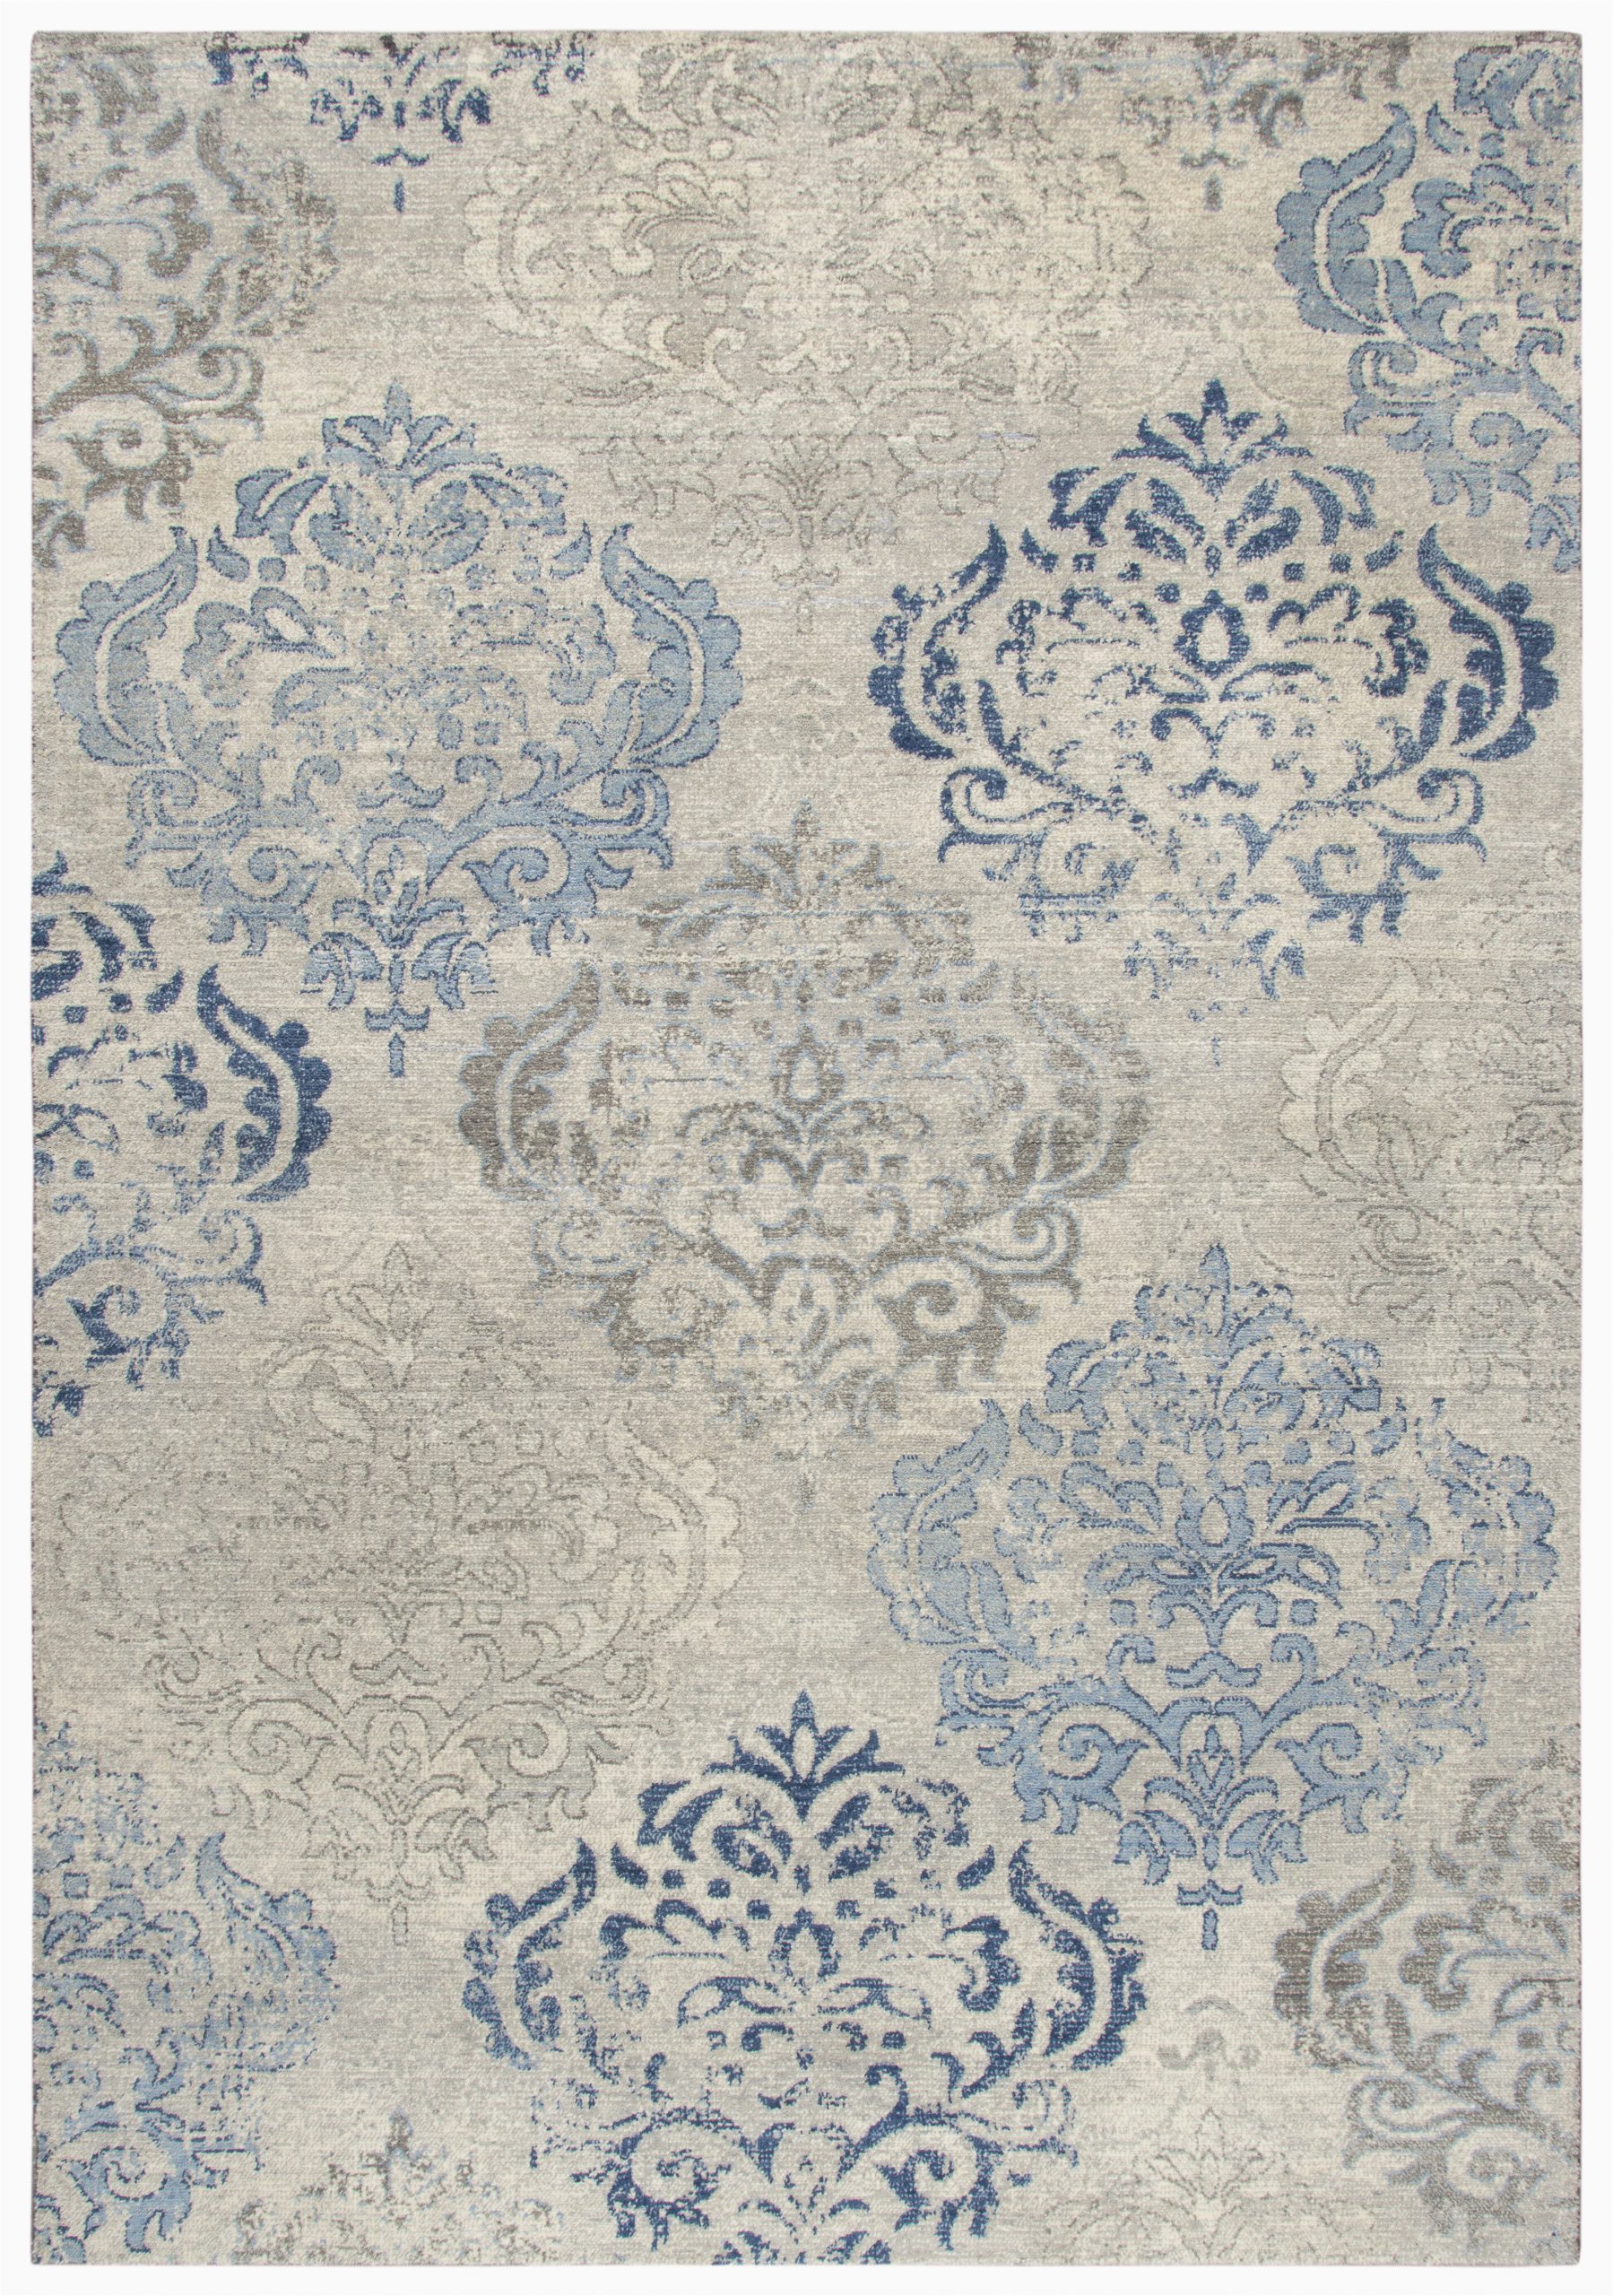 Wool area Rugs Blue Thora Floral Wool Light Gray Blue area Rug